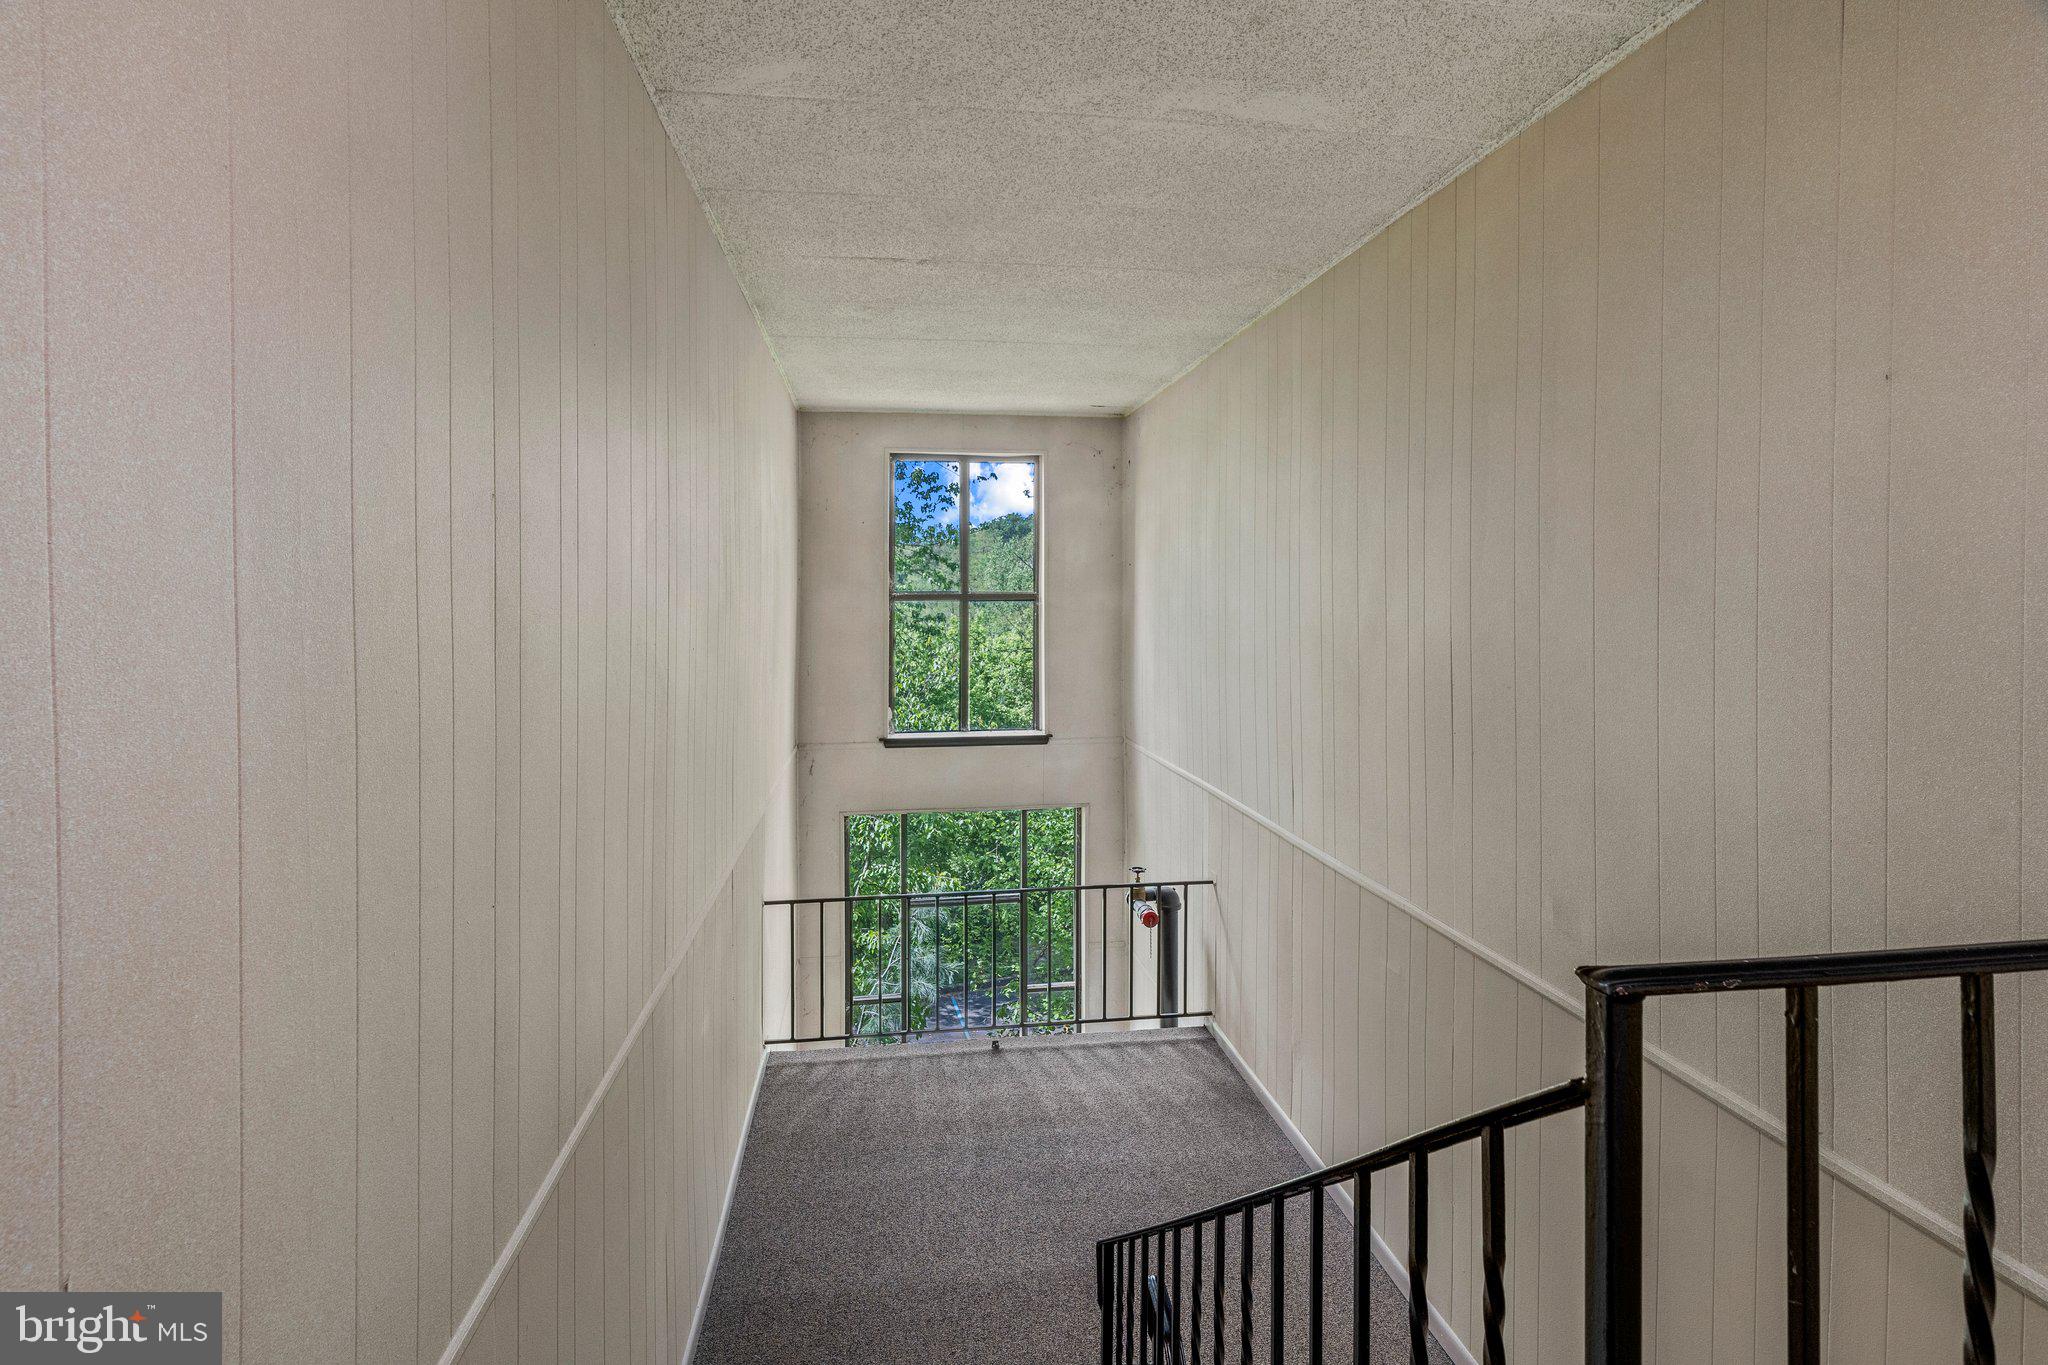 a view of entryway with stairs